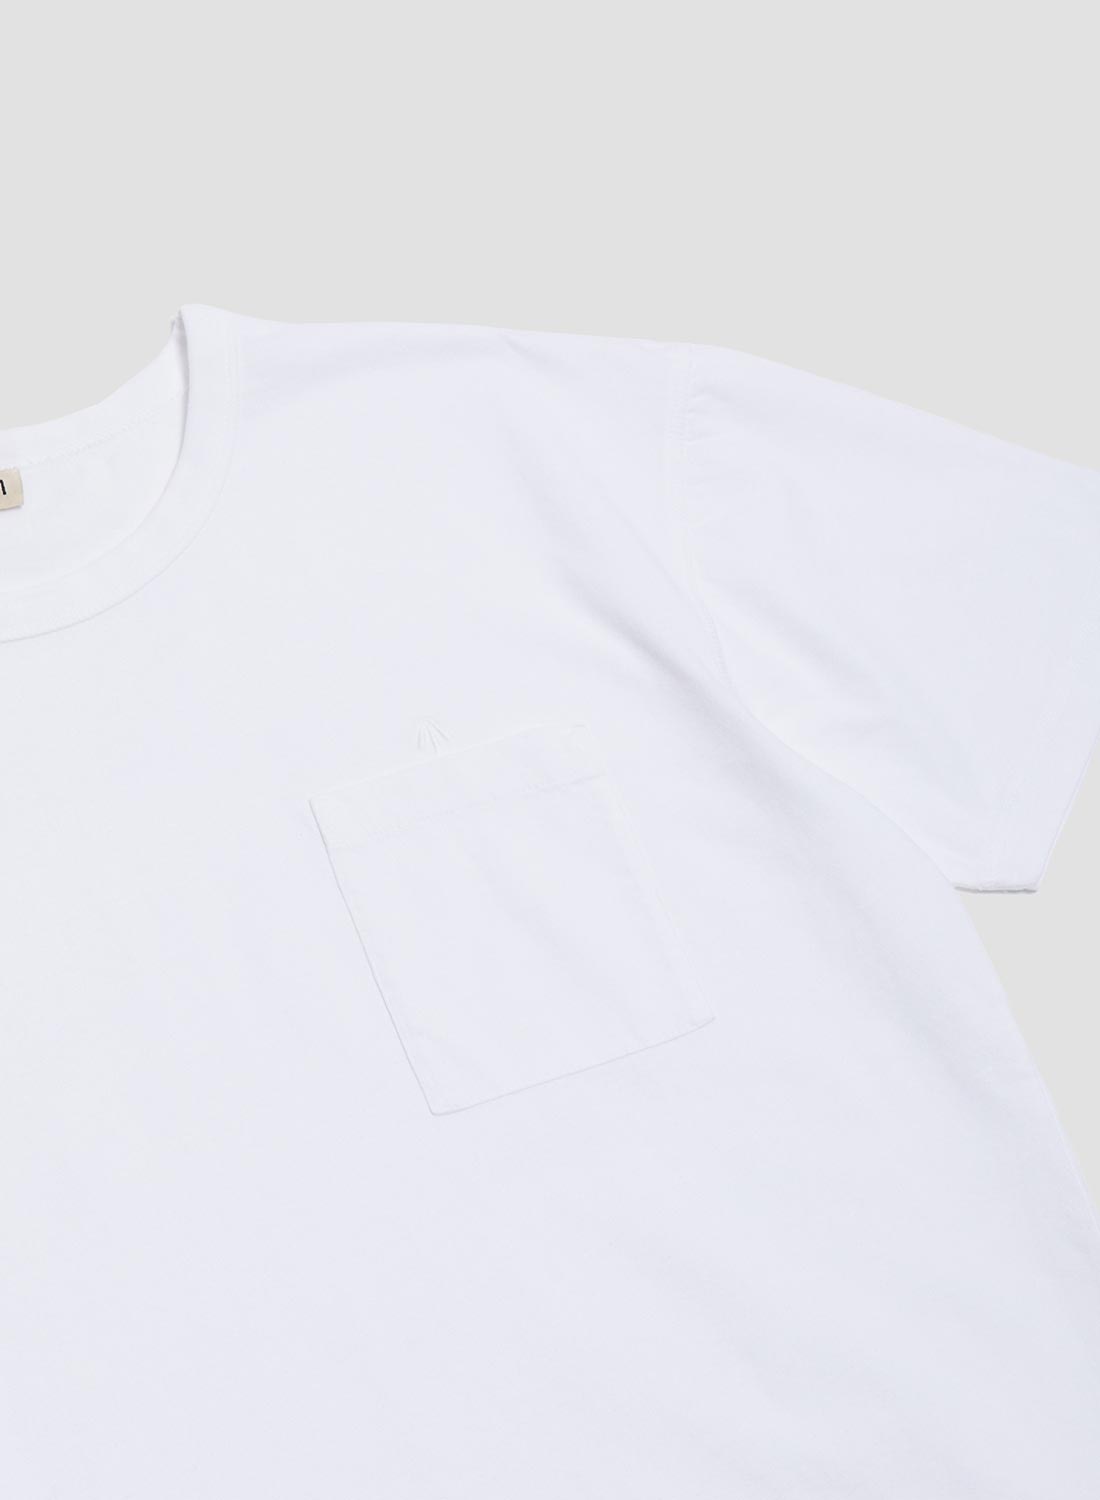 Classic Pocket Tee in White - 2